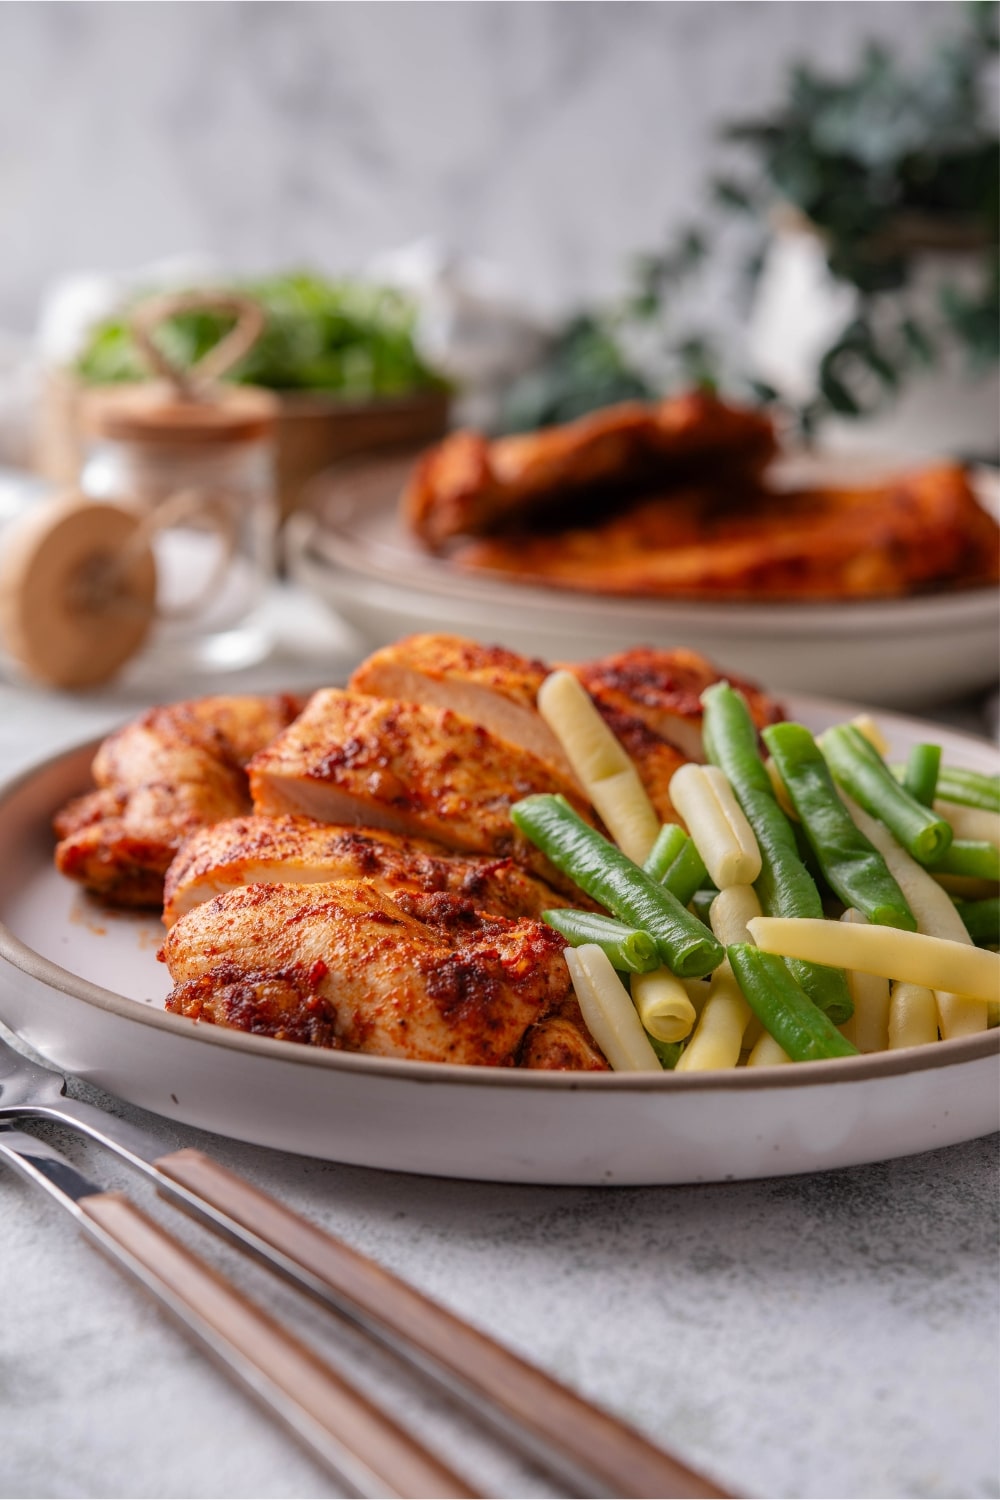 Baked thin chicken breasts on a plate served with steamed green beans.